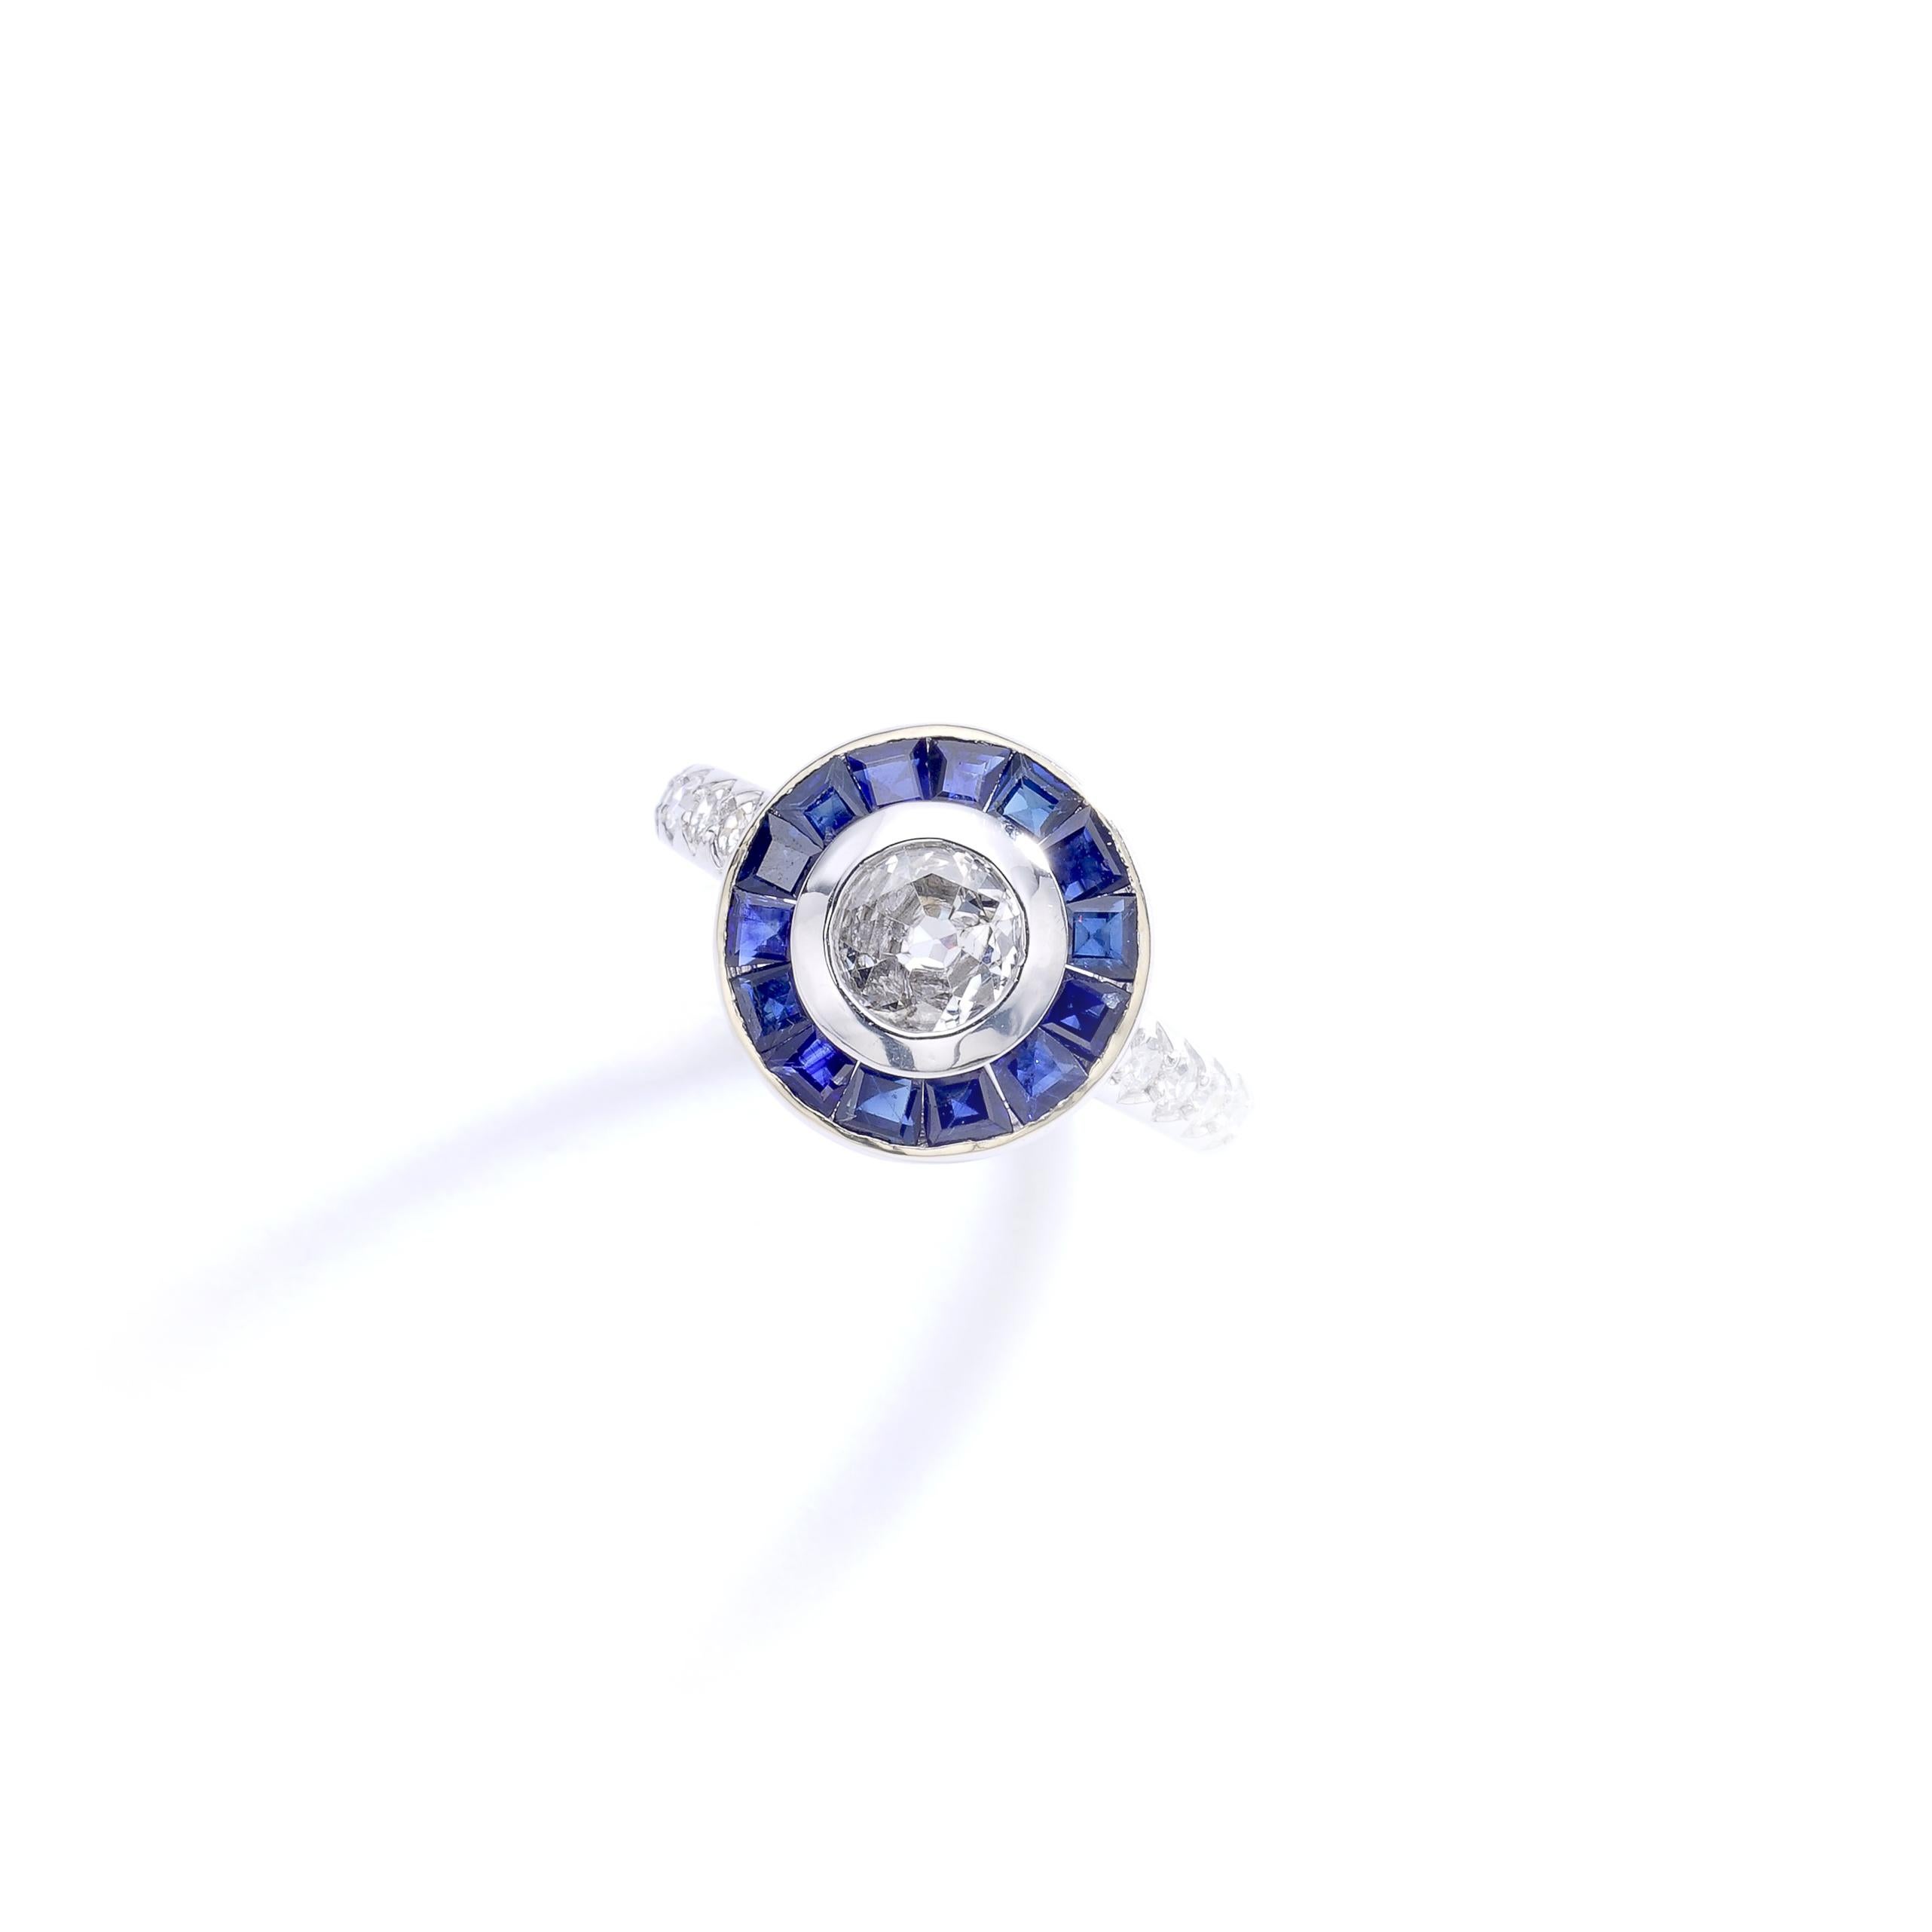 Contemporary ring in white gold 18k 750 centered by a round diamond (approximately 0.50 carat) surrounded by calibrated blue sapphire and tapered by diamond.
Italian marks.

Ring size: 6 1/4.